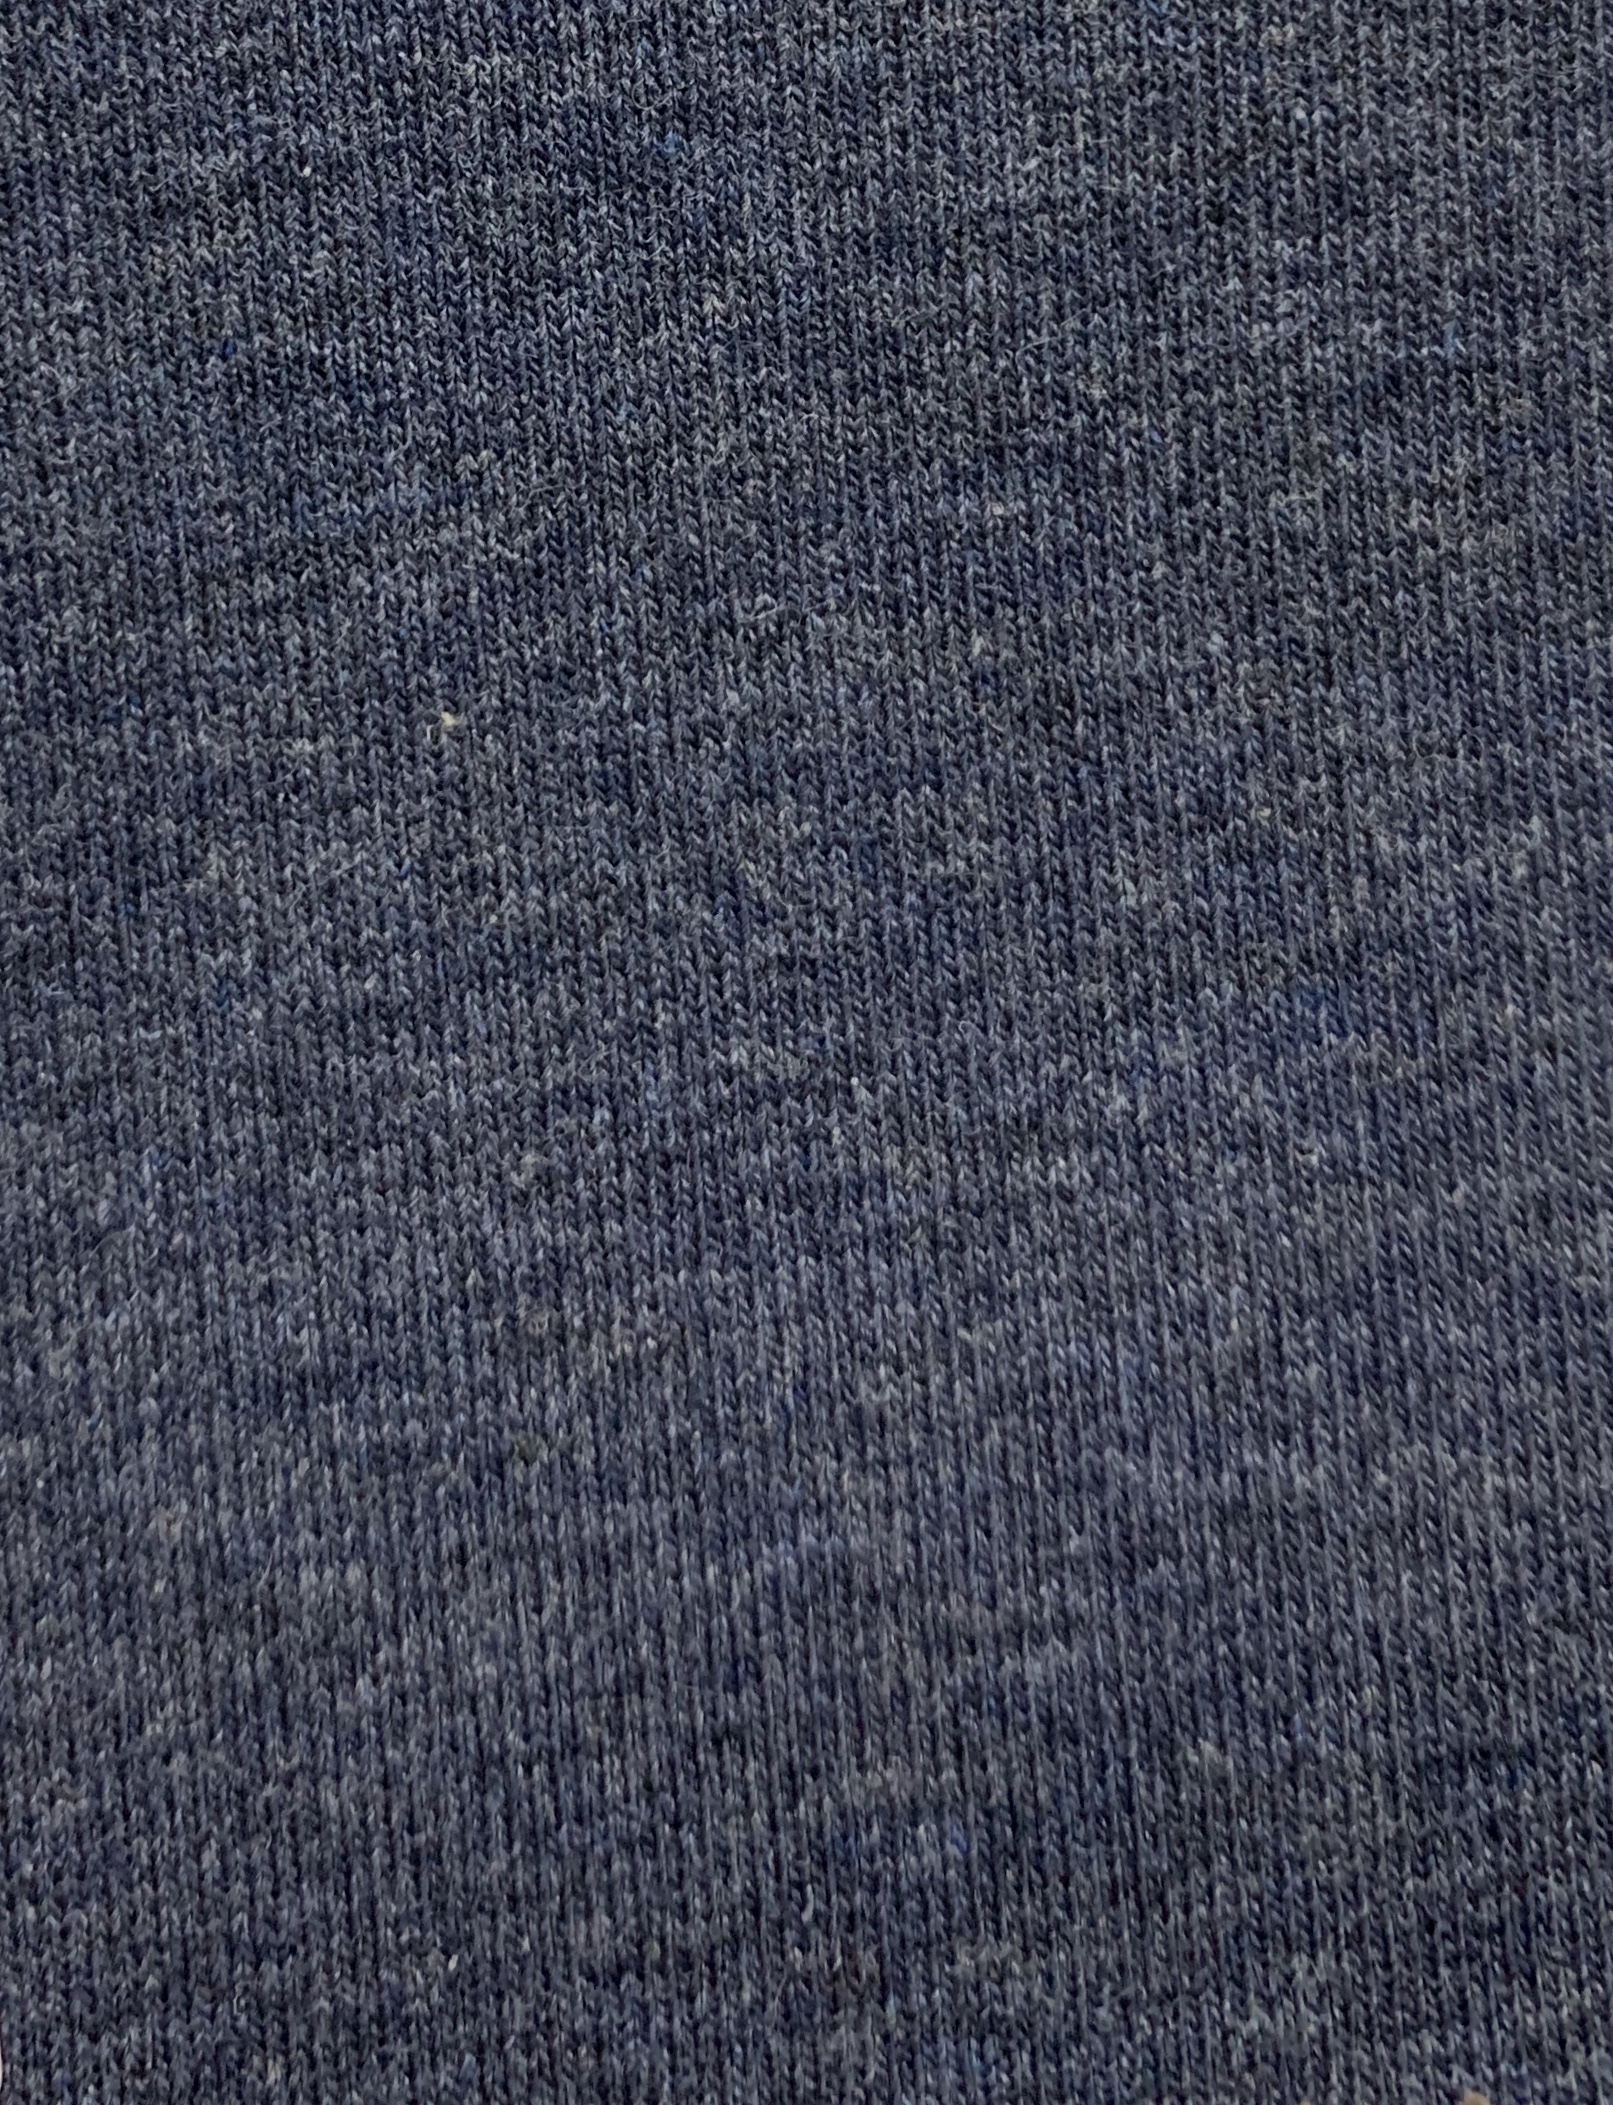 Denim Cotton / Spandex Knit Fabric Suppliers 19163145 - Wholesale  Manufacturers and Exporters